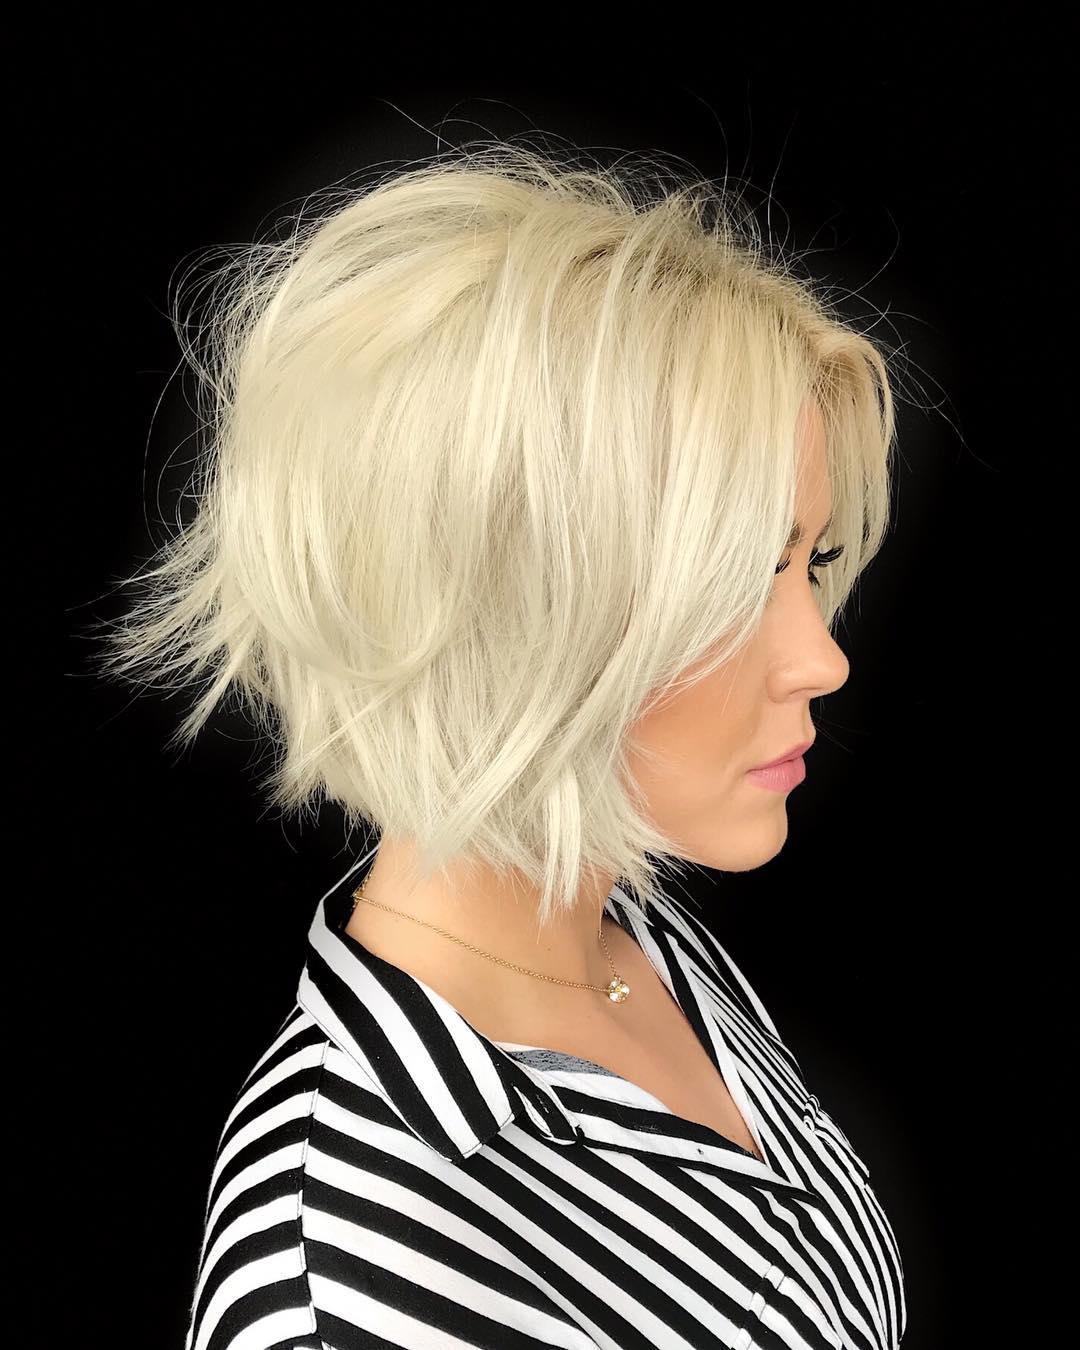 Classic Short Bob Haircut and Color, Best Short Hair Styles for Women